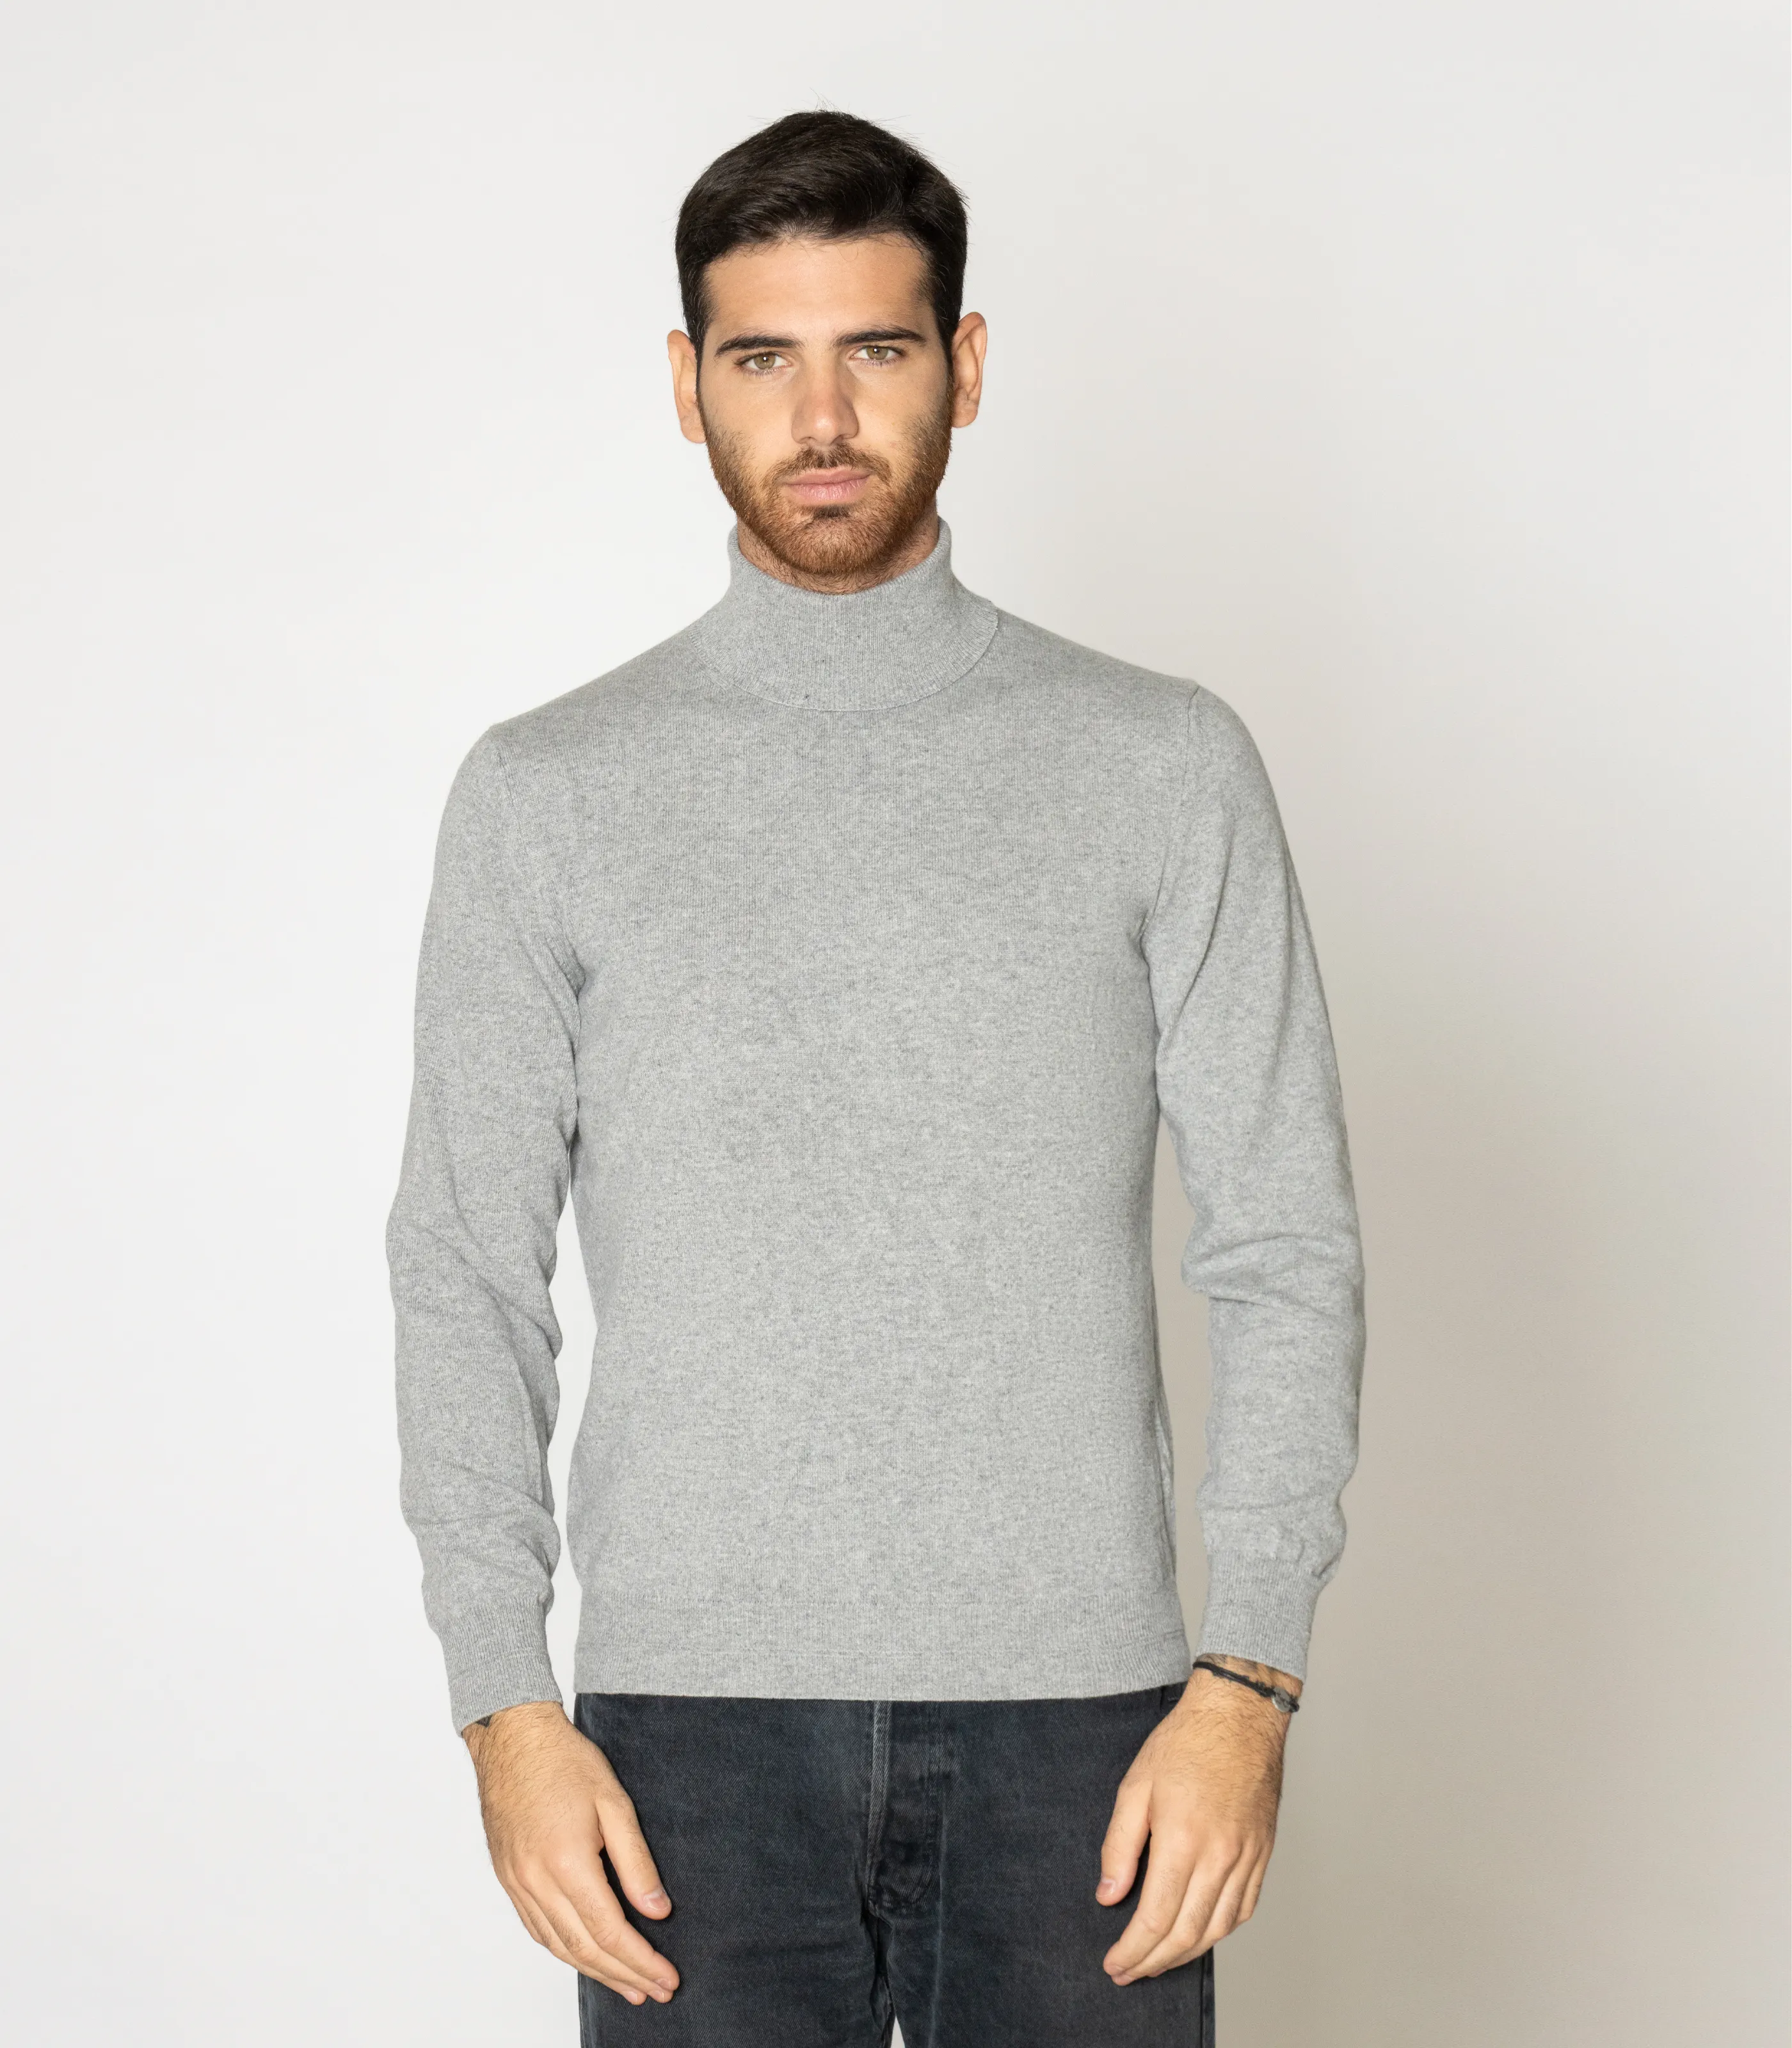 Clothes wholesale hand knitting yarn cashmere sweater men cashmere long sleeve high neck turtleneck